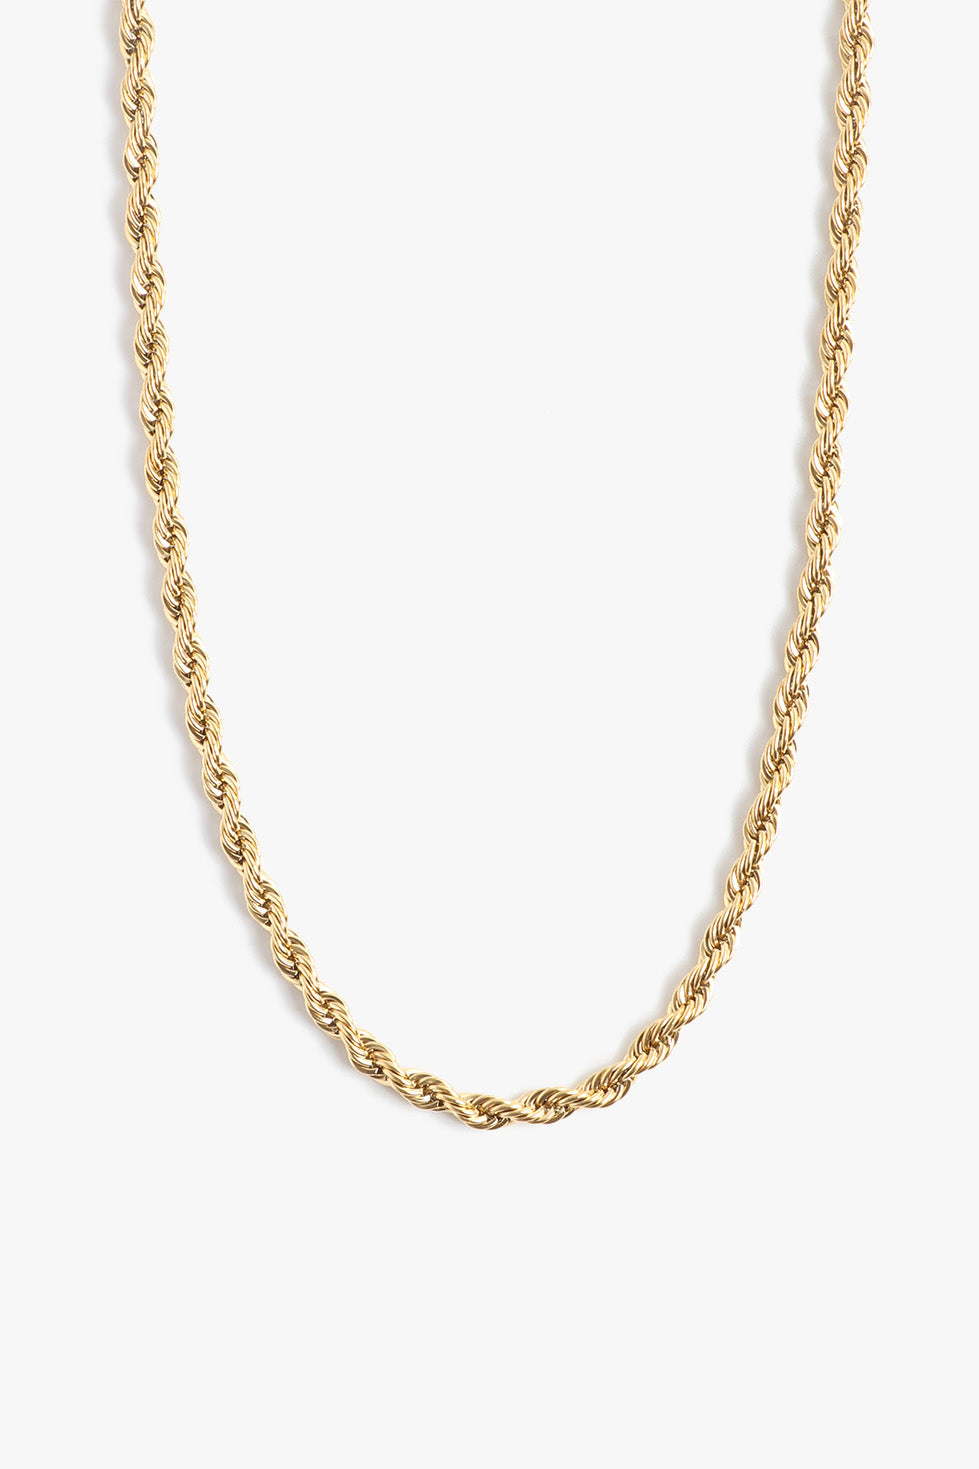 Marrin Costello Jewelry Helix 5mm Chain thick rope twist chain with lobster clasp closure and extender. Waterproof, sustainable, hypoallergenic. 14k gold plated stainless steel.